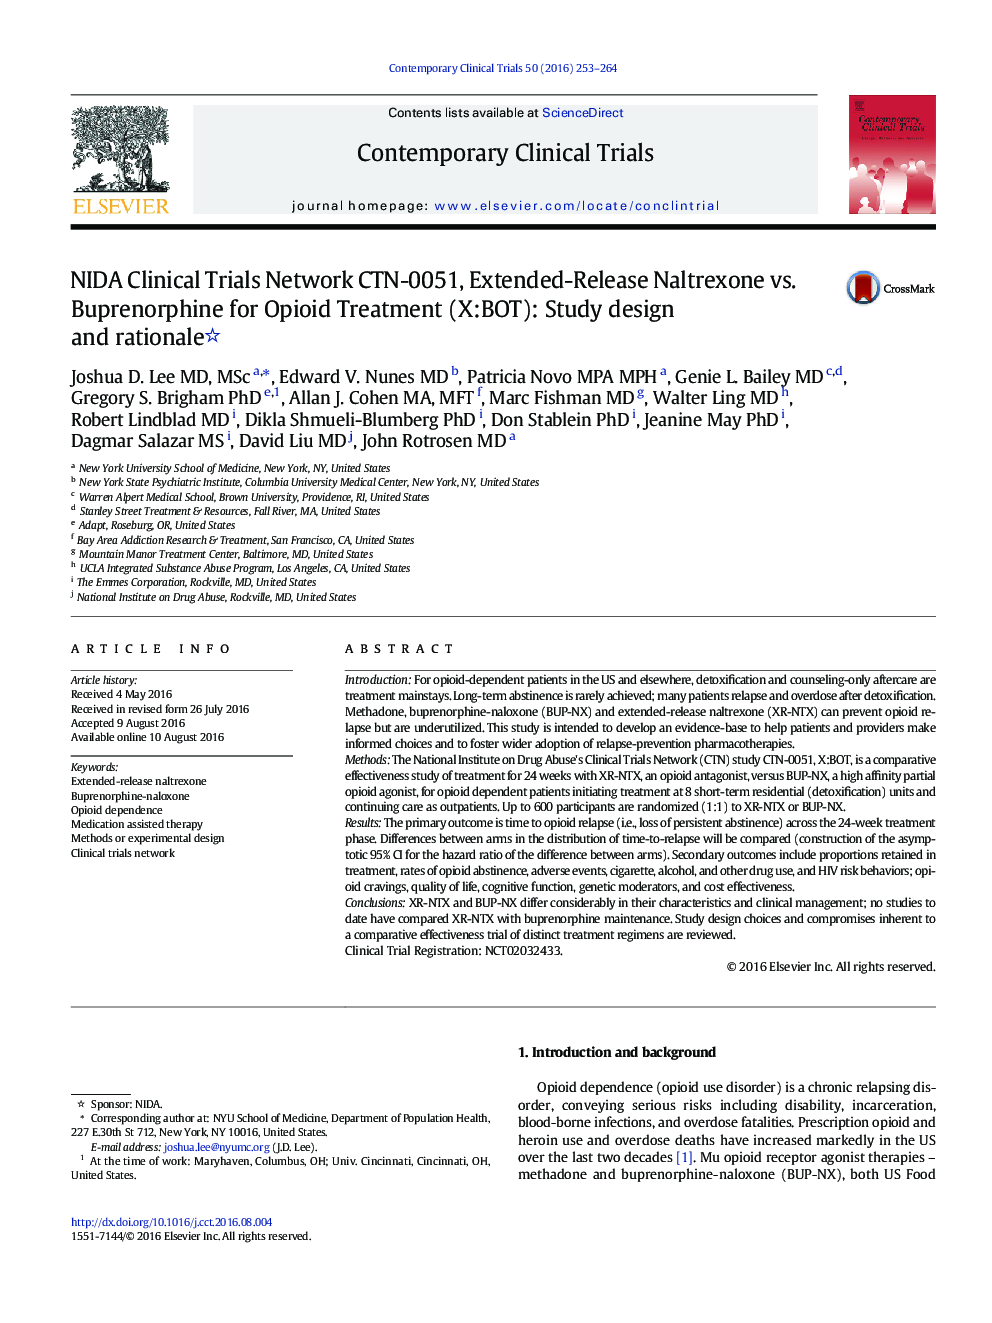 NIDA Clinical Trials Network CTN-0051, Extended-Release Naltrexone vs. Buprenorphine for Opioid Treatment (X:BOT): Study design and rationale 